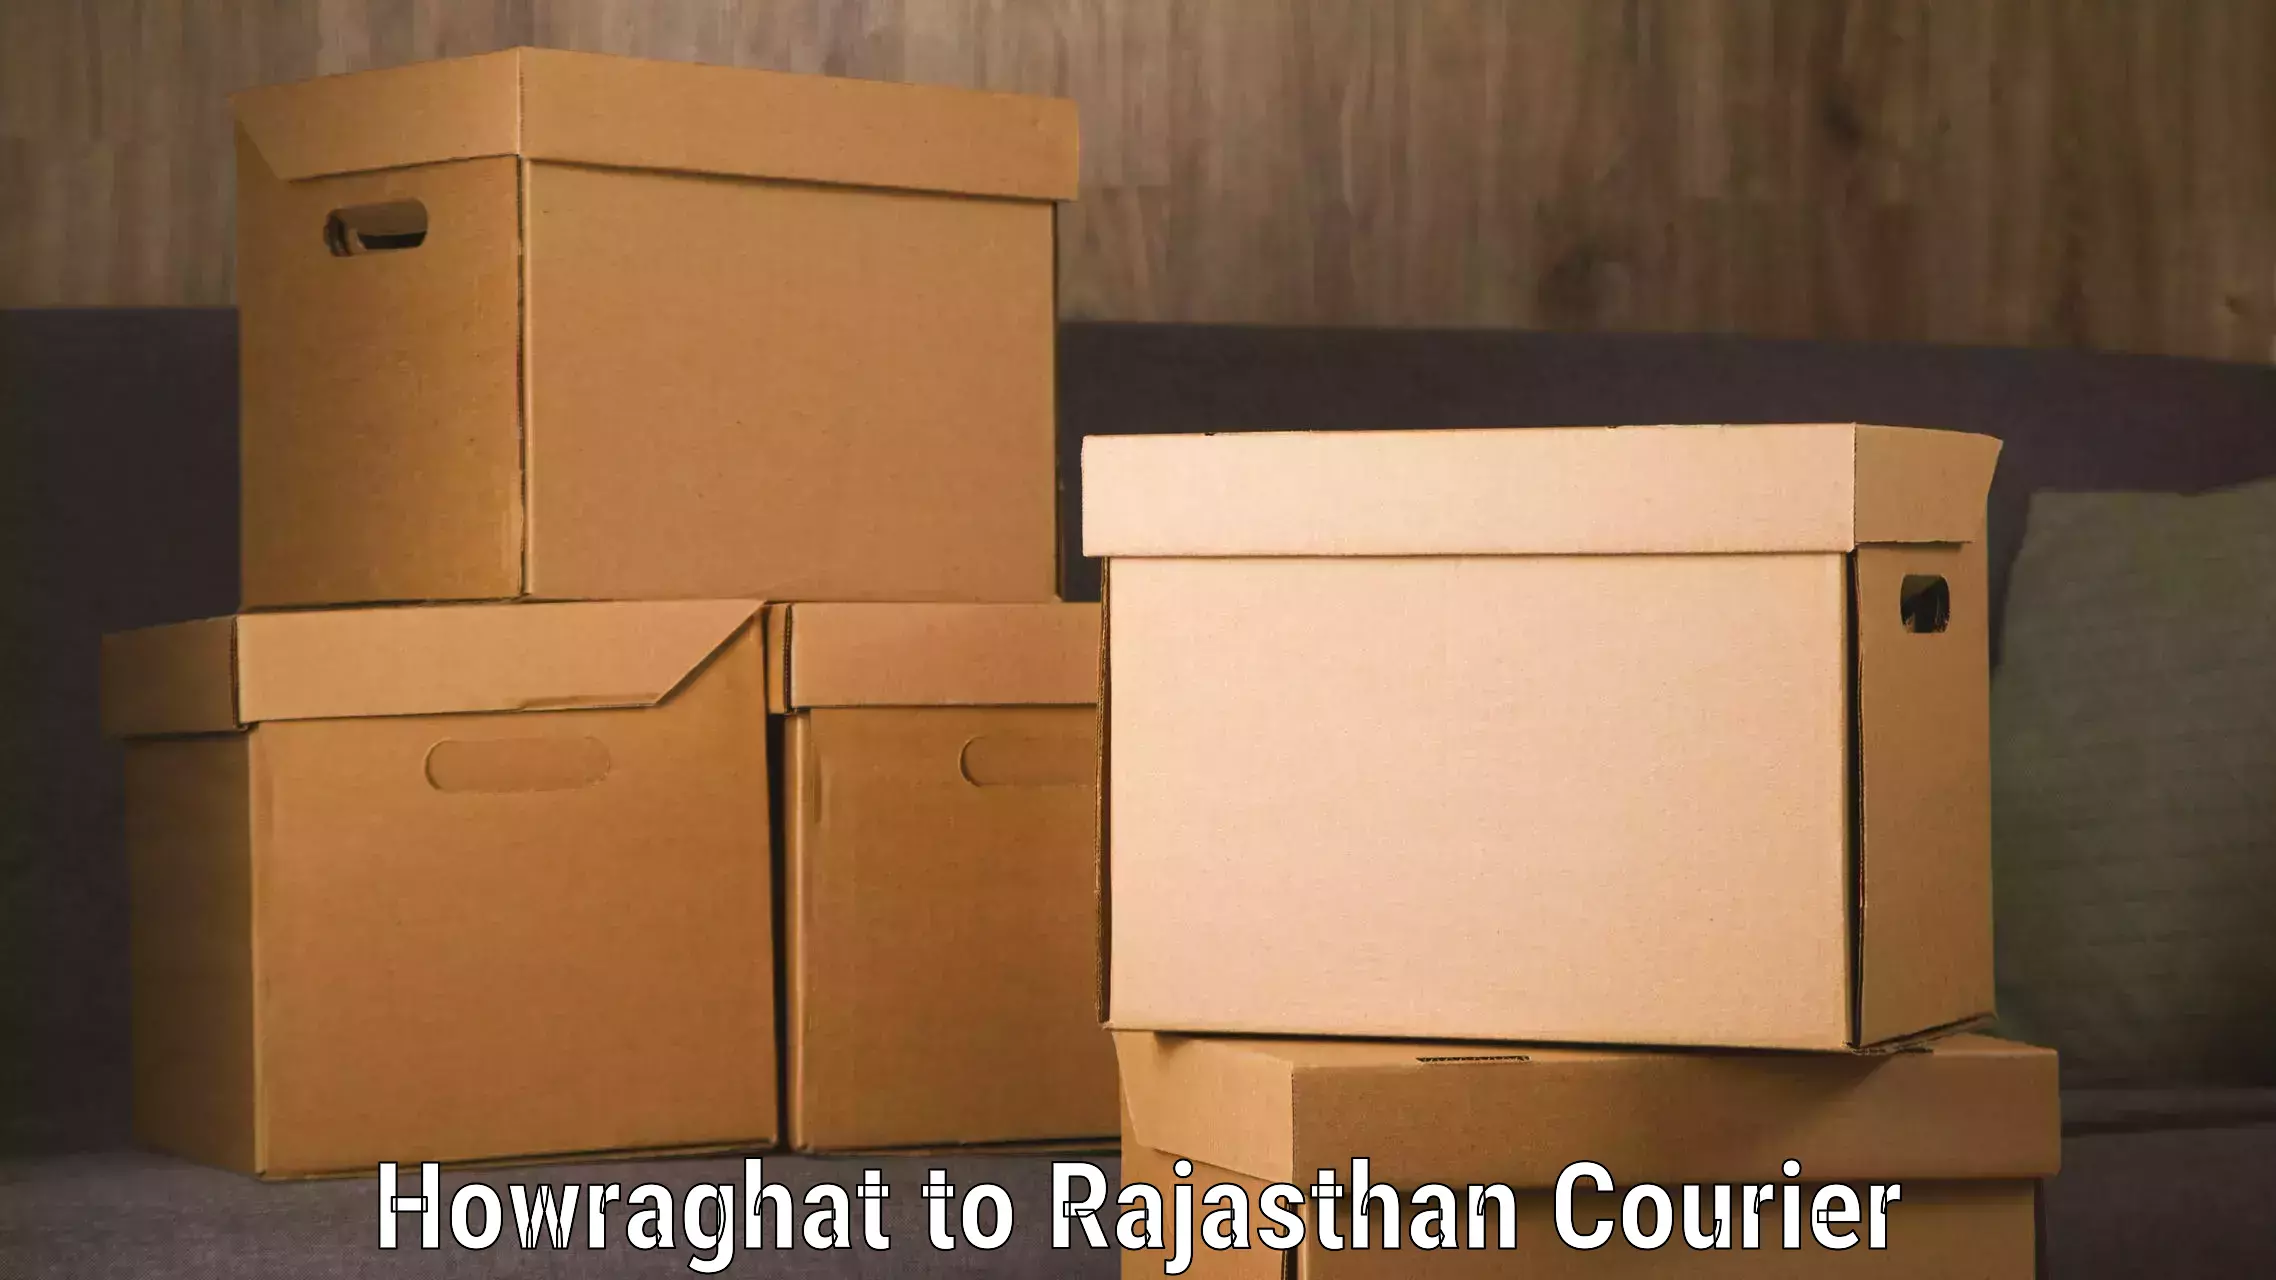 Efficient luggage delivery Howraghat to Suratgarh